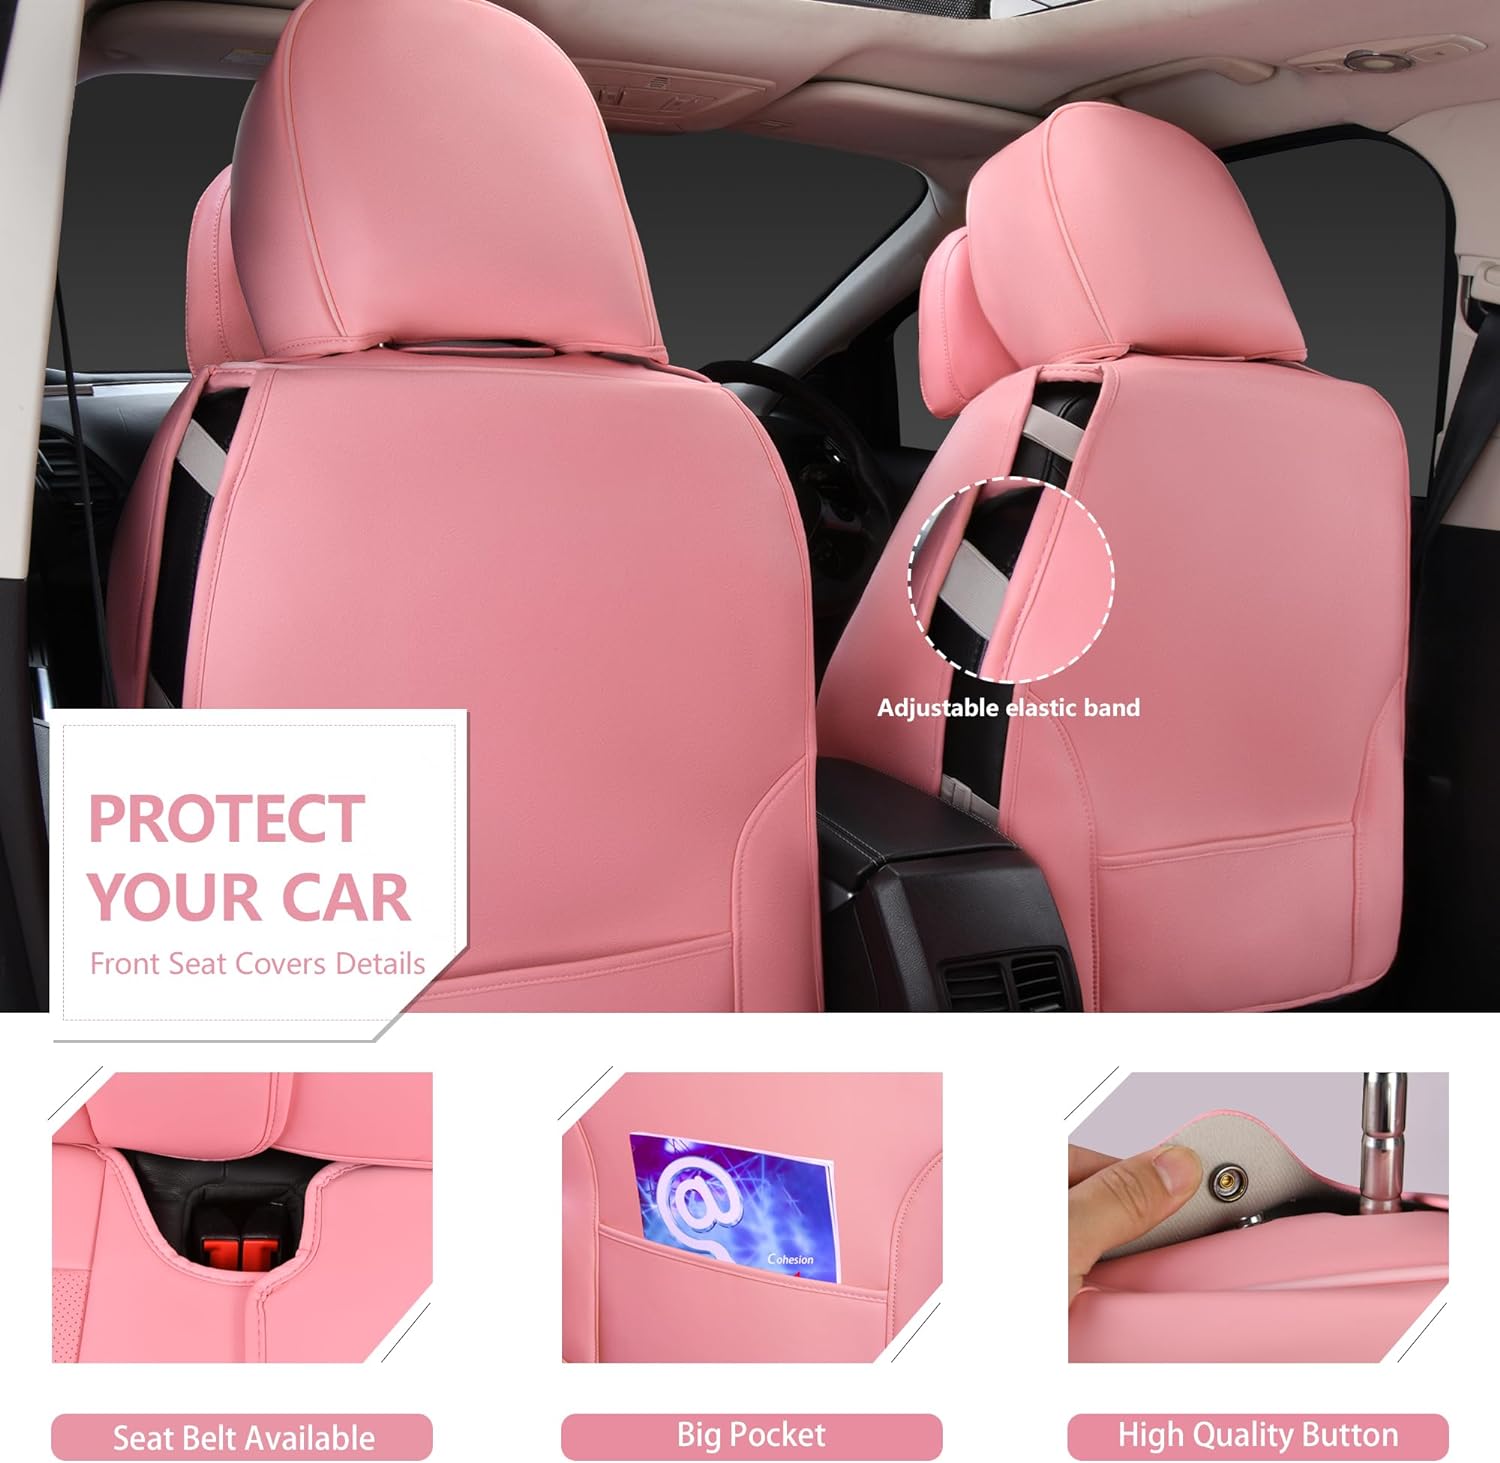 CAR PASS Nappa Leather Car Seat Covers Full Set, 5 Seats Universal Seat Covers for Cars, Waterproof Luxury Lumbar Support Front and Rear Seat Cover for Sedan SUV Pick-up Truck, Black Rainbow Chameleon